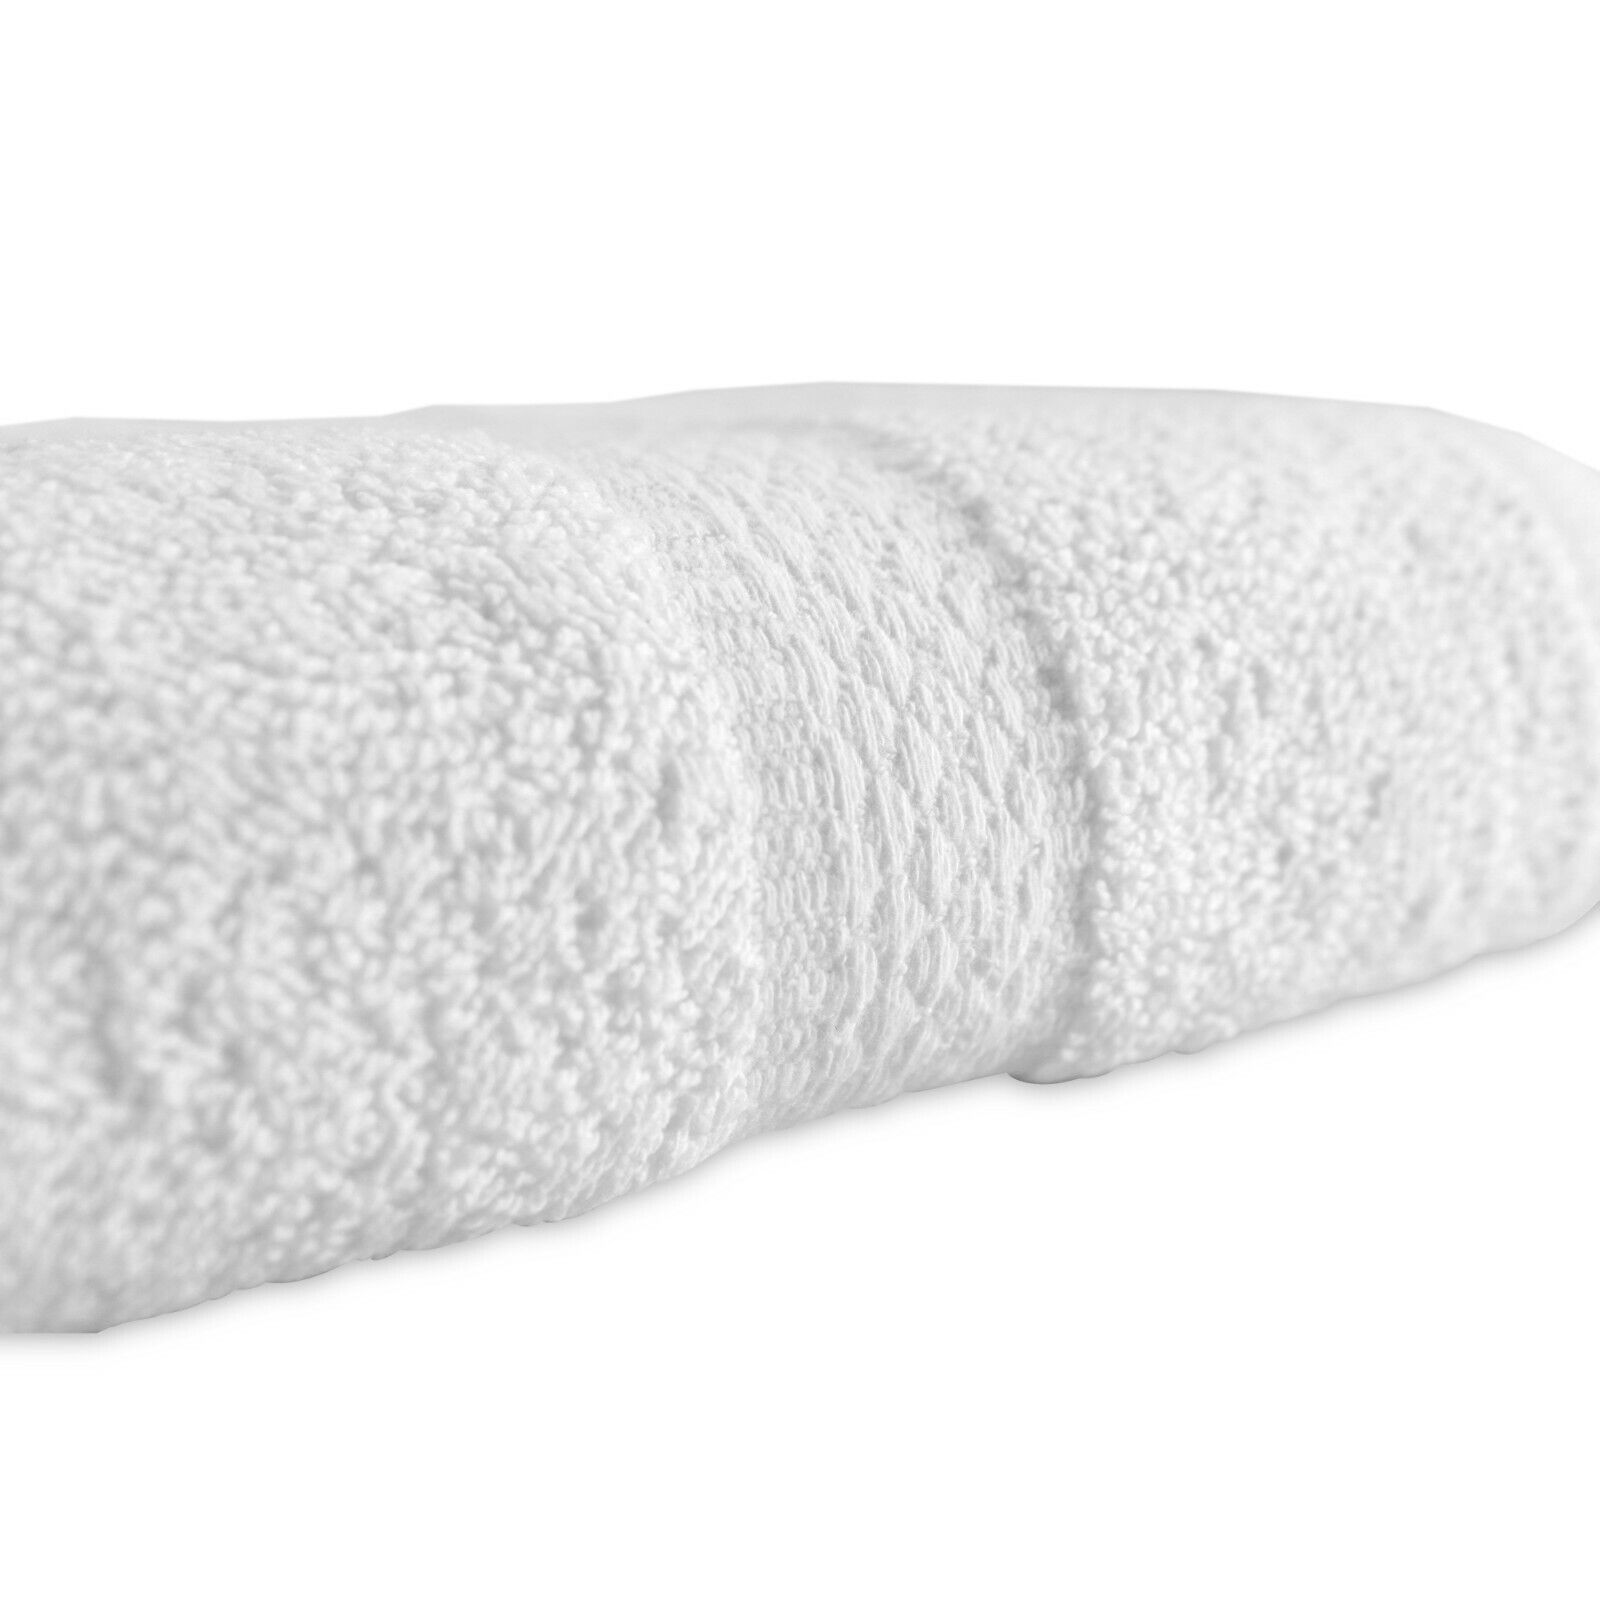 12 Pack of Admiral Washcloths - White - 13x13 - Bulk Bathroom Cotton Towels Arkwright Does Not Apply - фотография #3